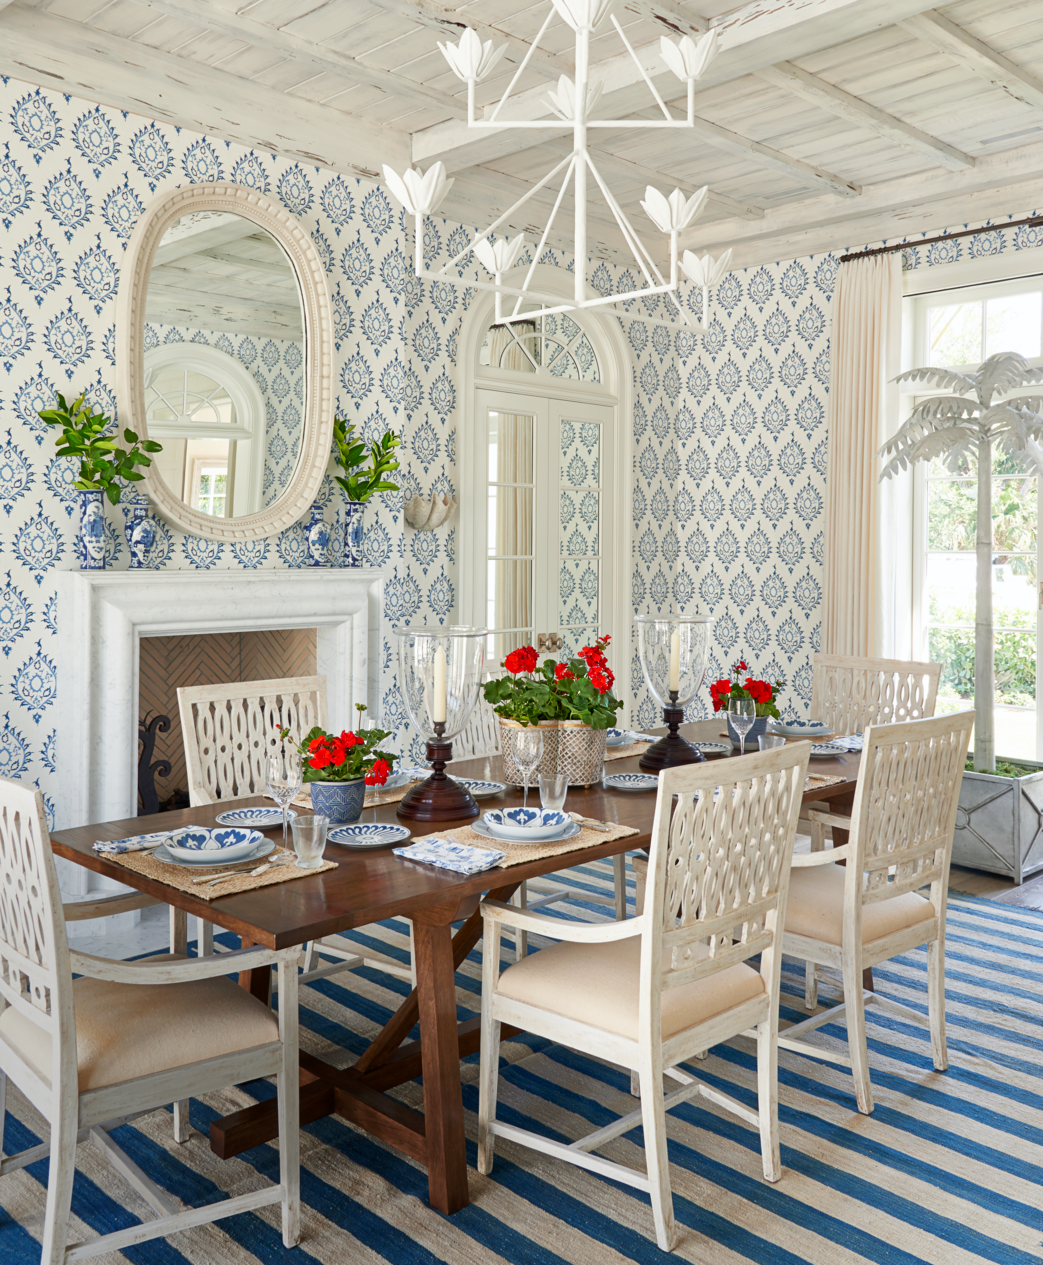 18 Beautiful Dining Room Wallpaper Ideas 2021 - How To Choose Wallpaper For Dining Room